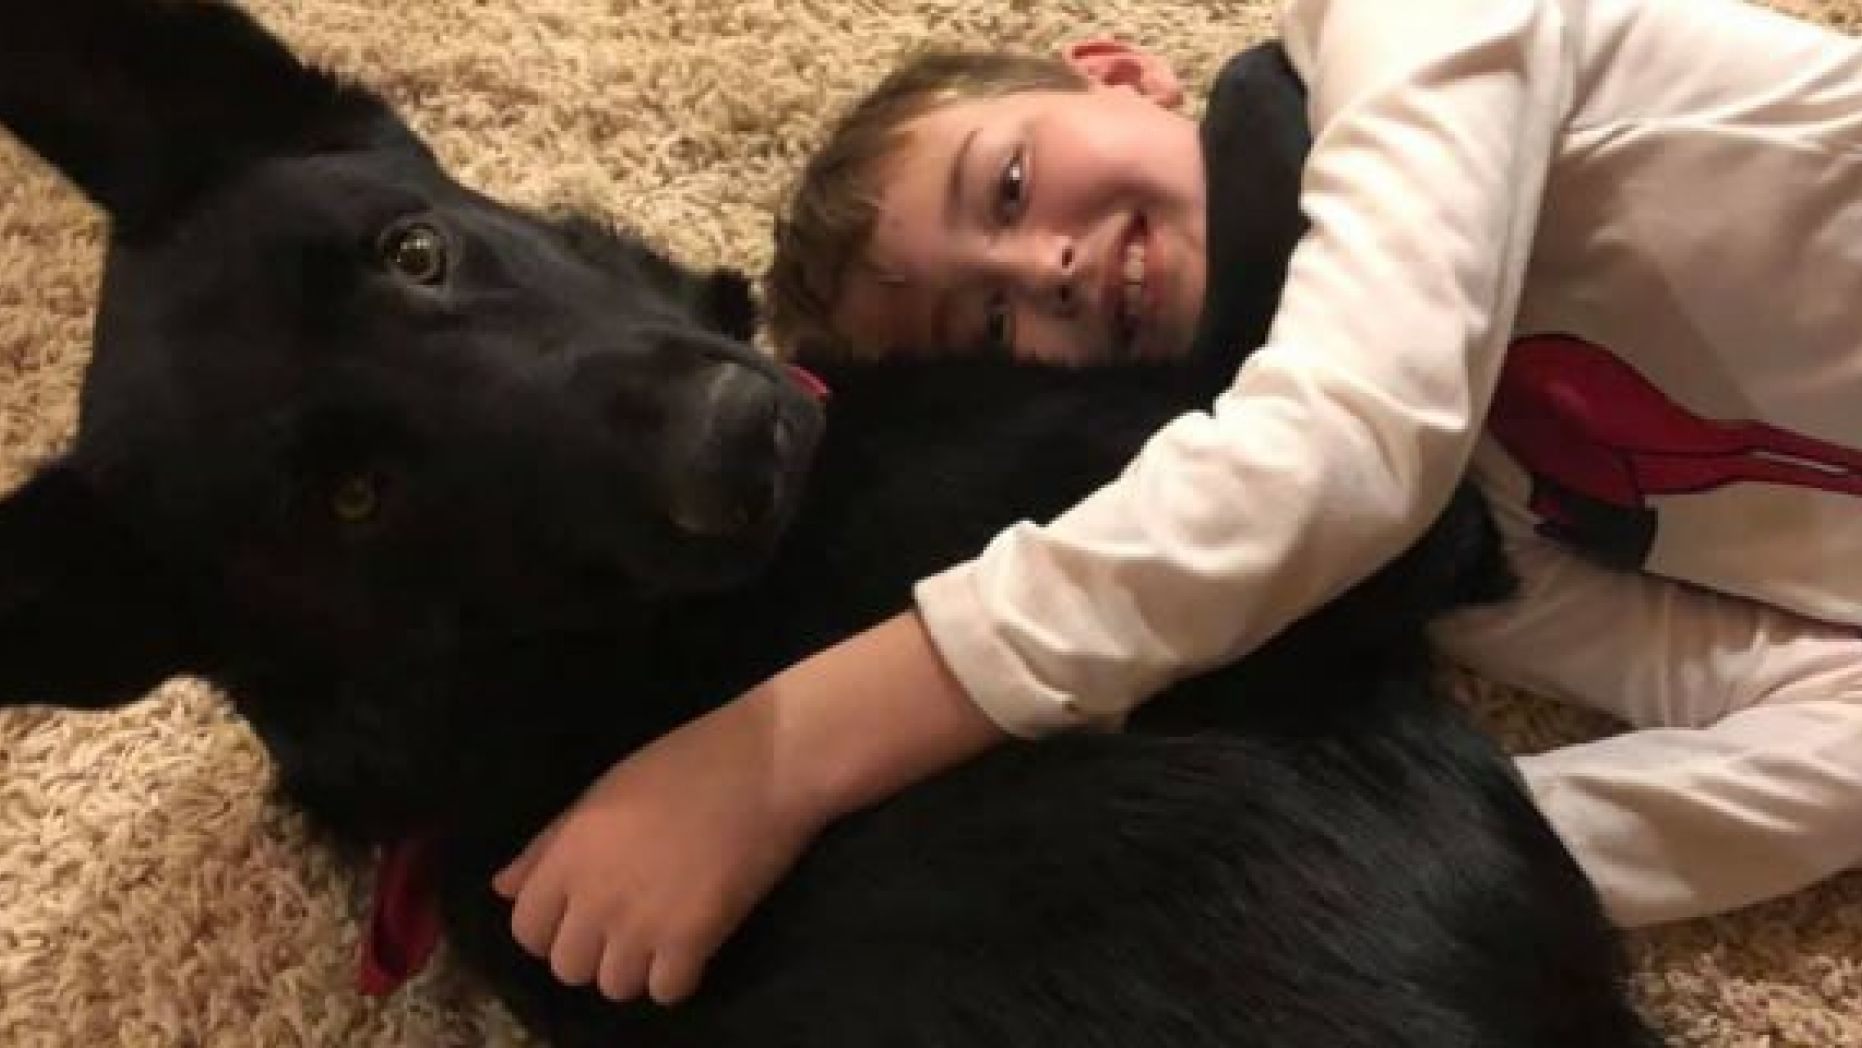 An 8-year-old North Carolina boy, who is receiving cancer treatment in Utah, was reunited with his beloved dog thanks to the kindness of a complete stranger.